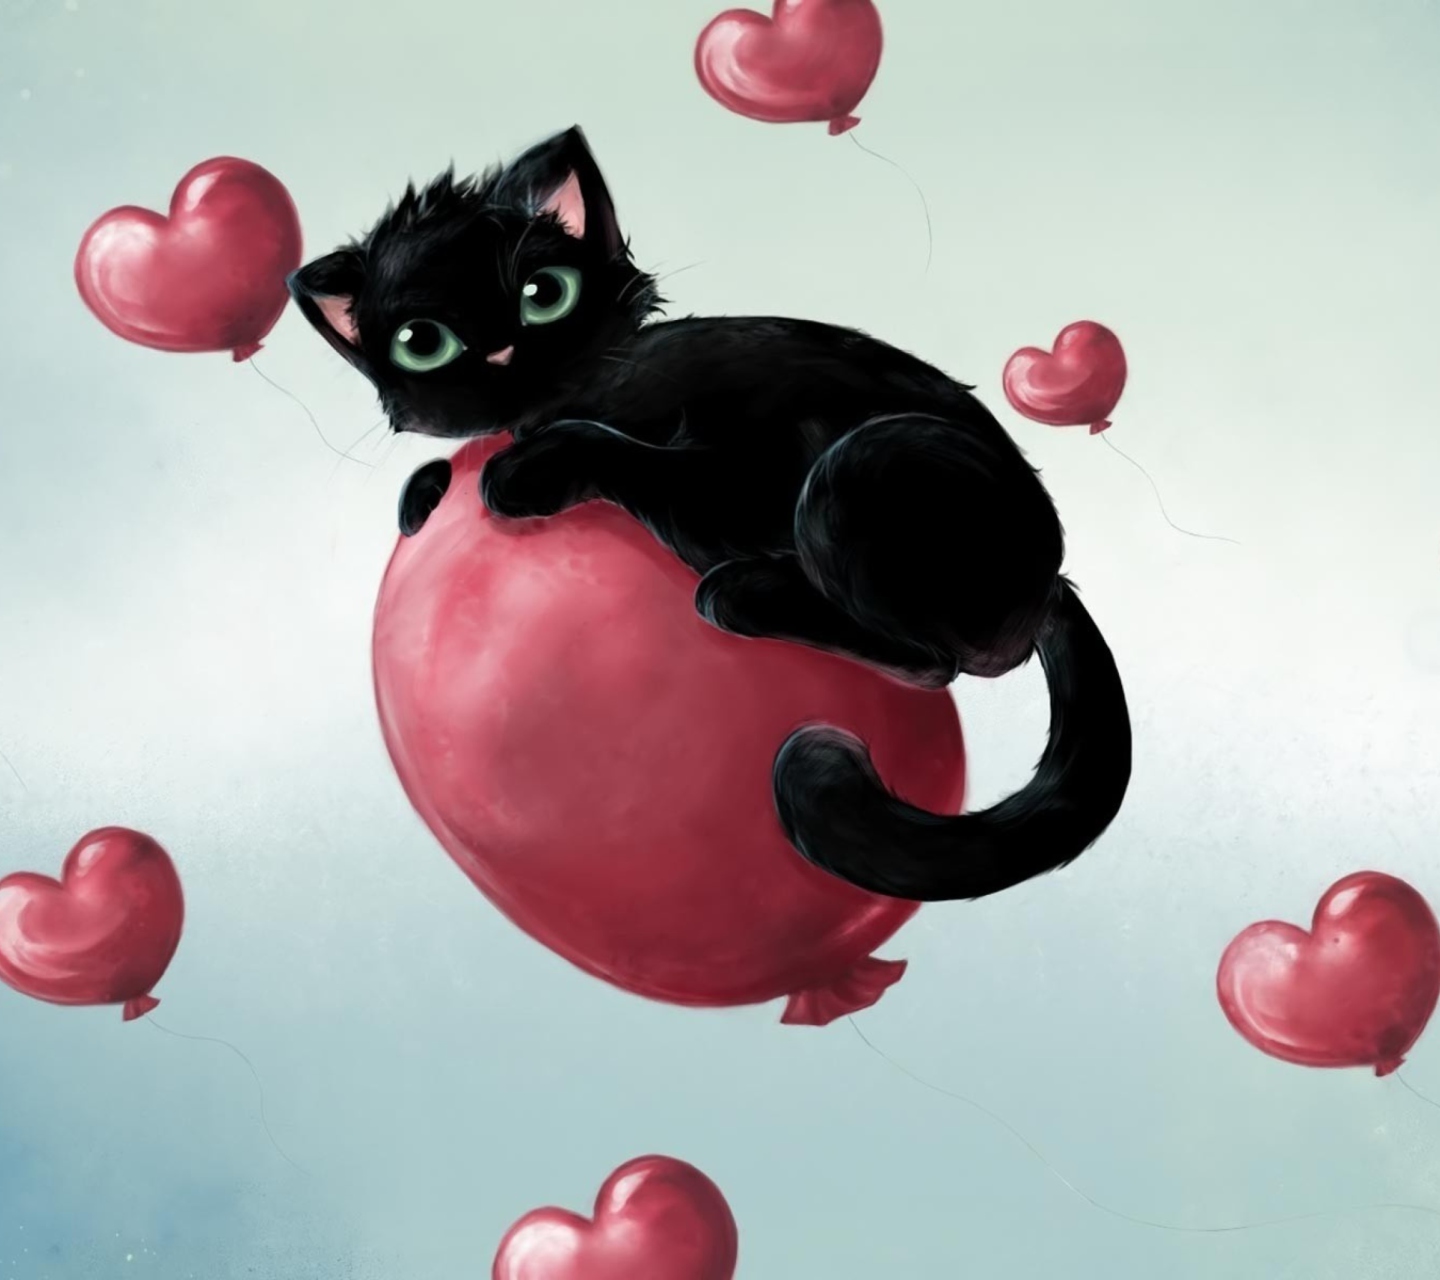 Black Kitty And Red Heart Balloons wallpaper 1440x1280